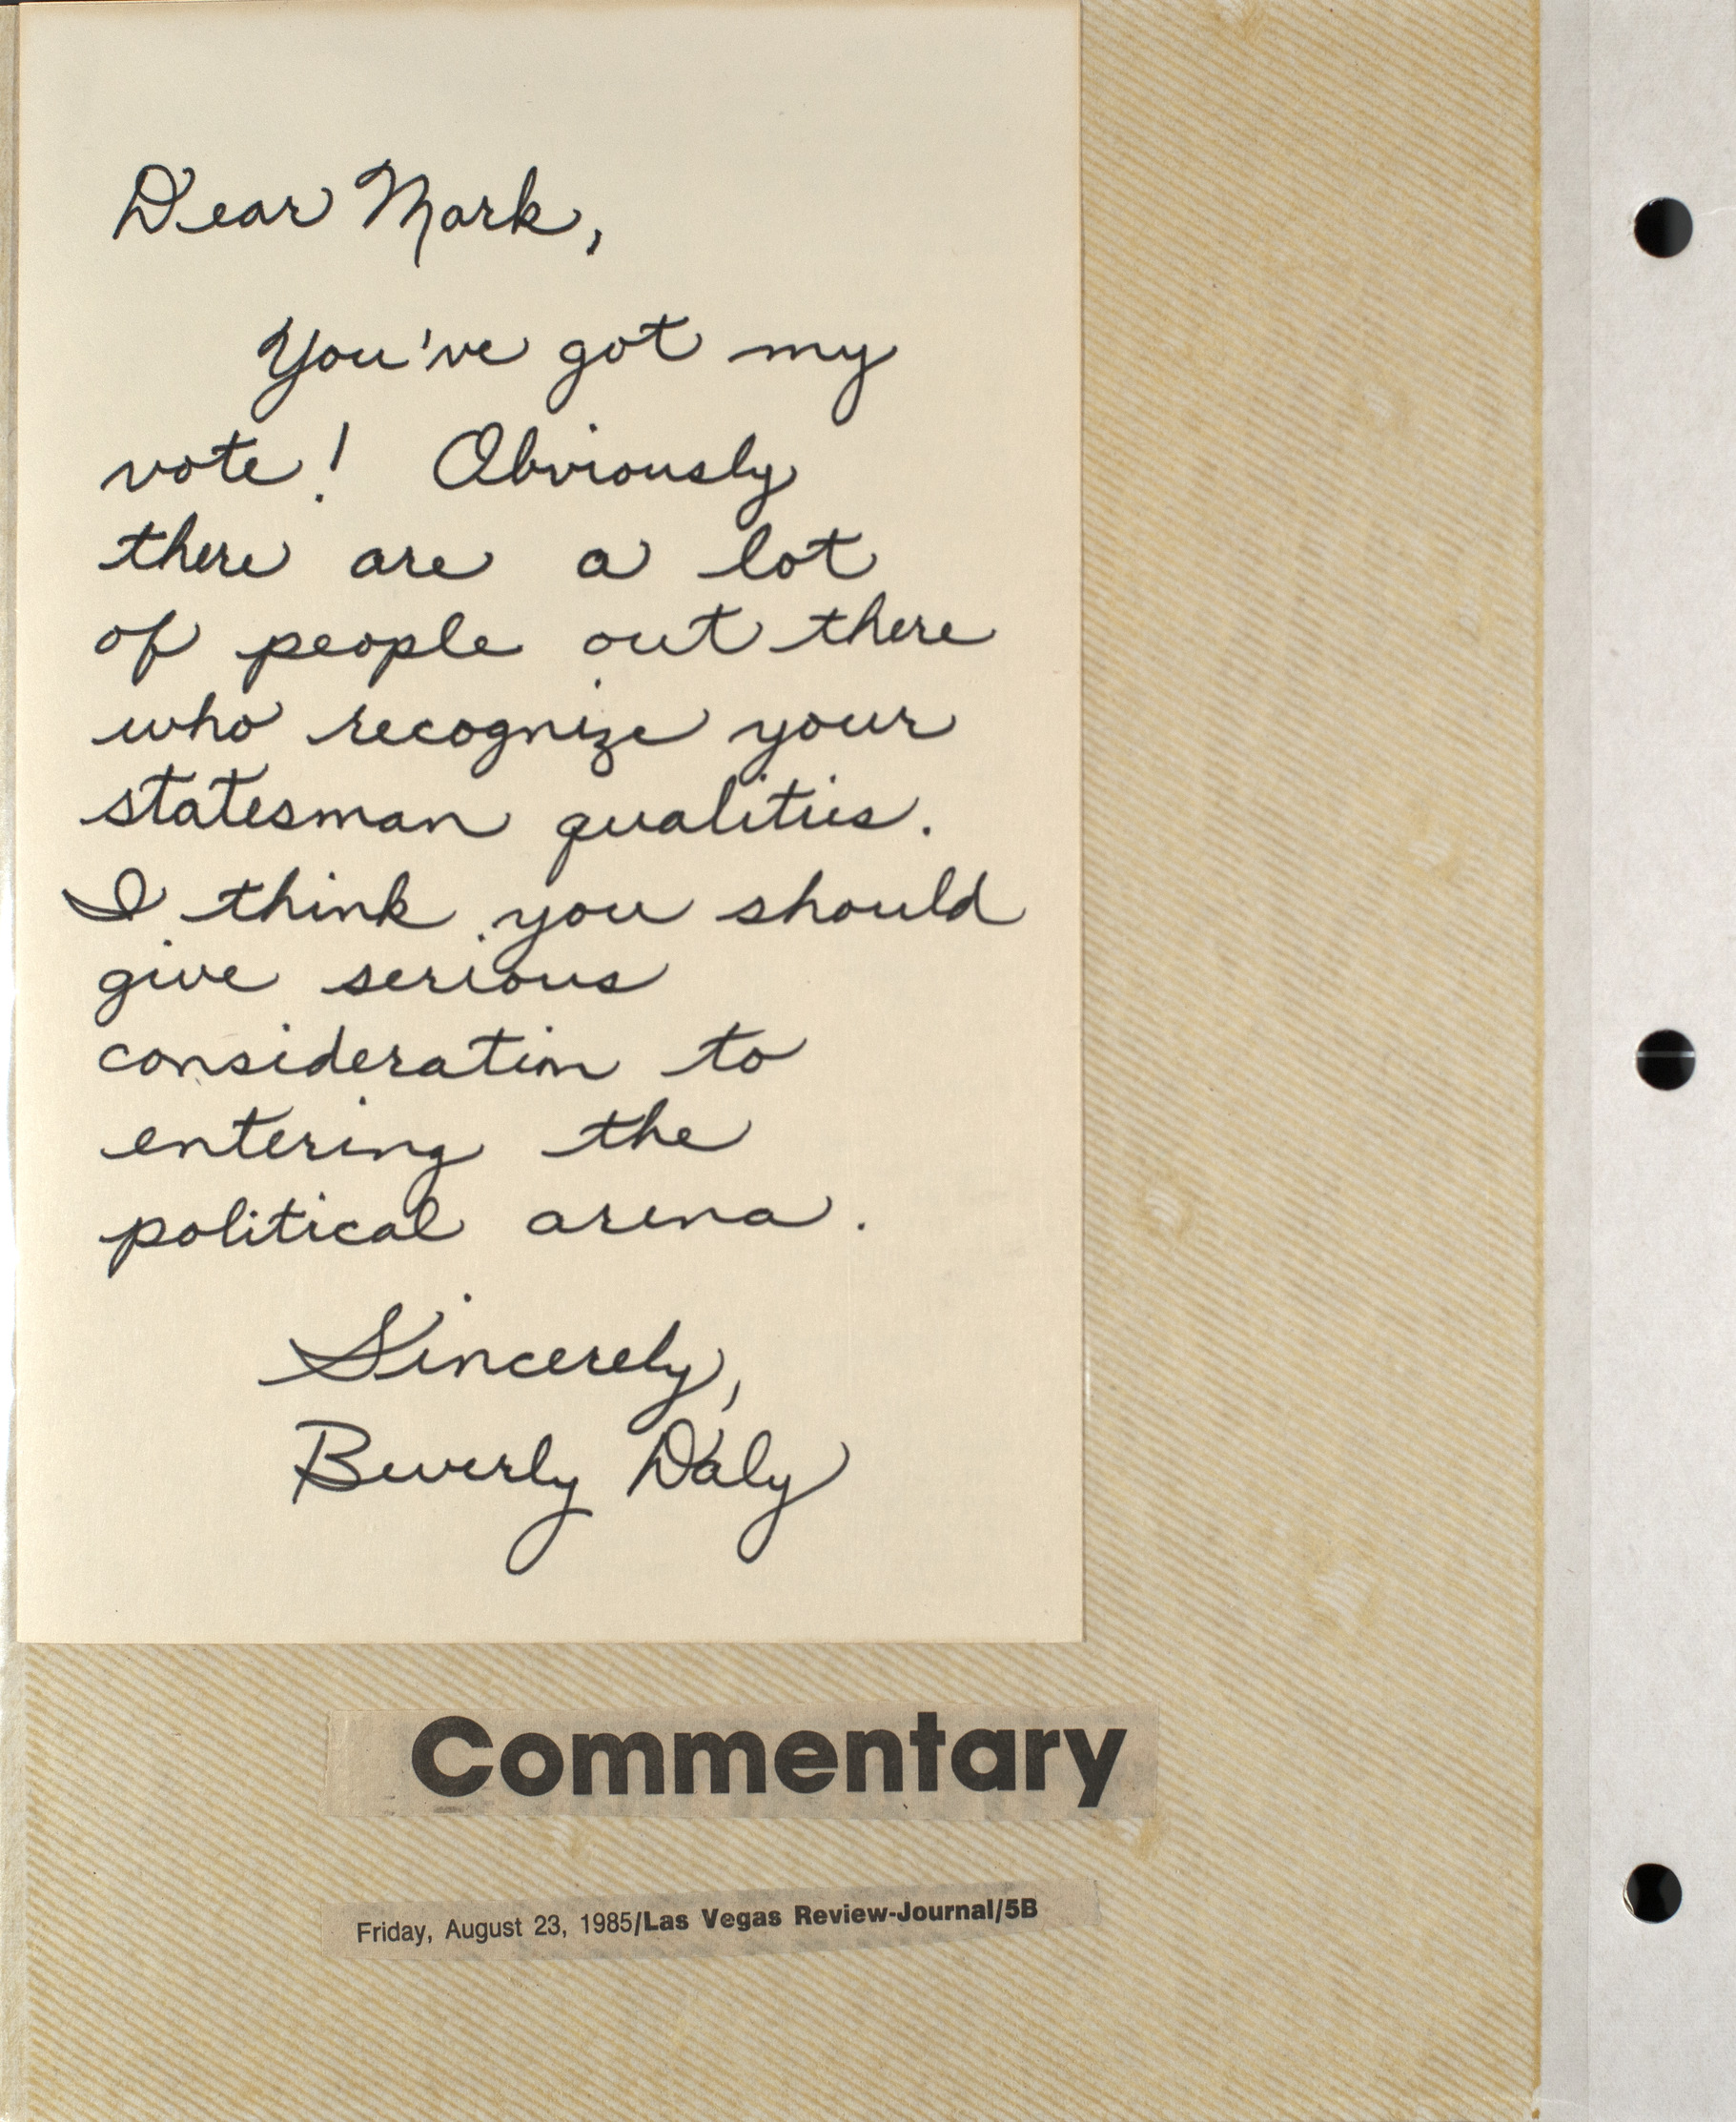 Handwritten letter from Beverly Daly to Mark Fine, undated